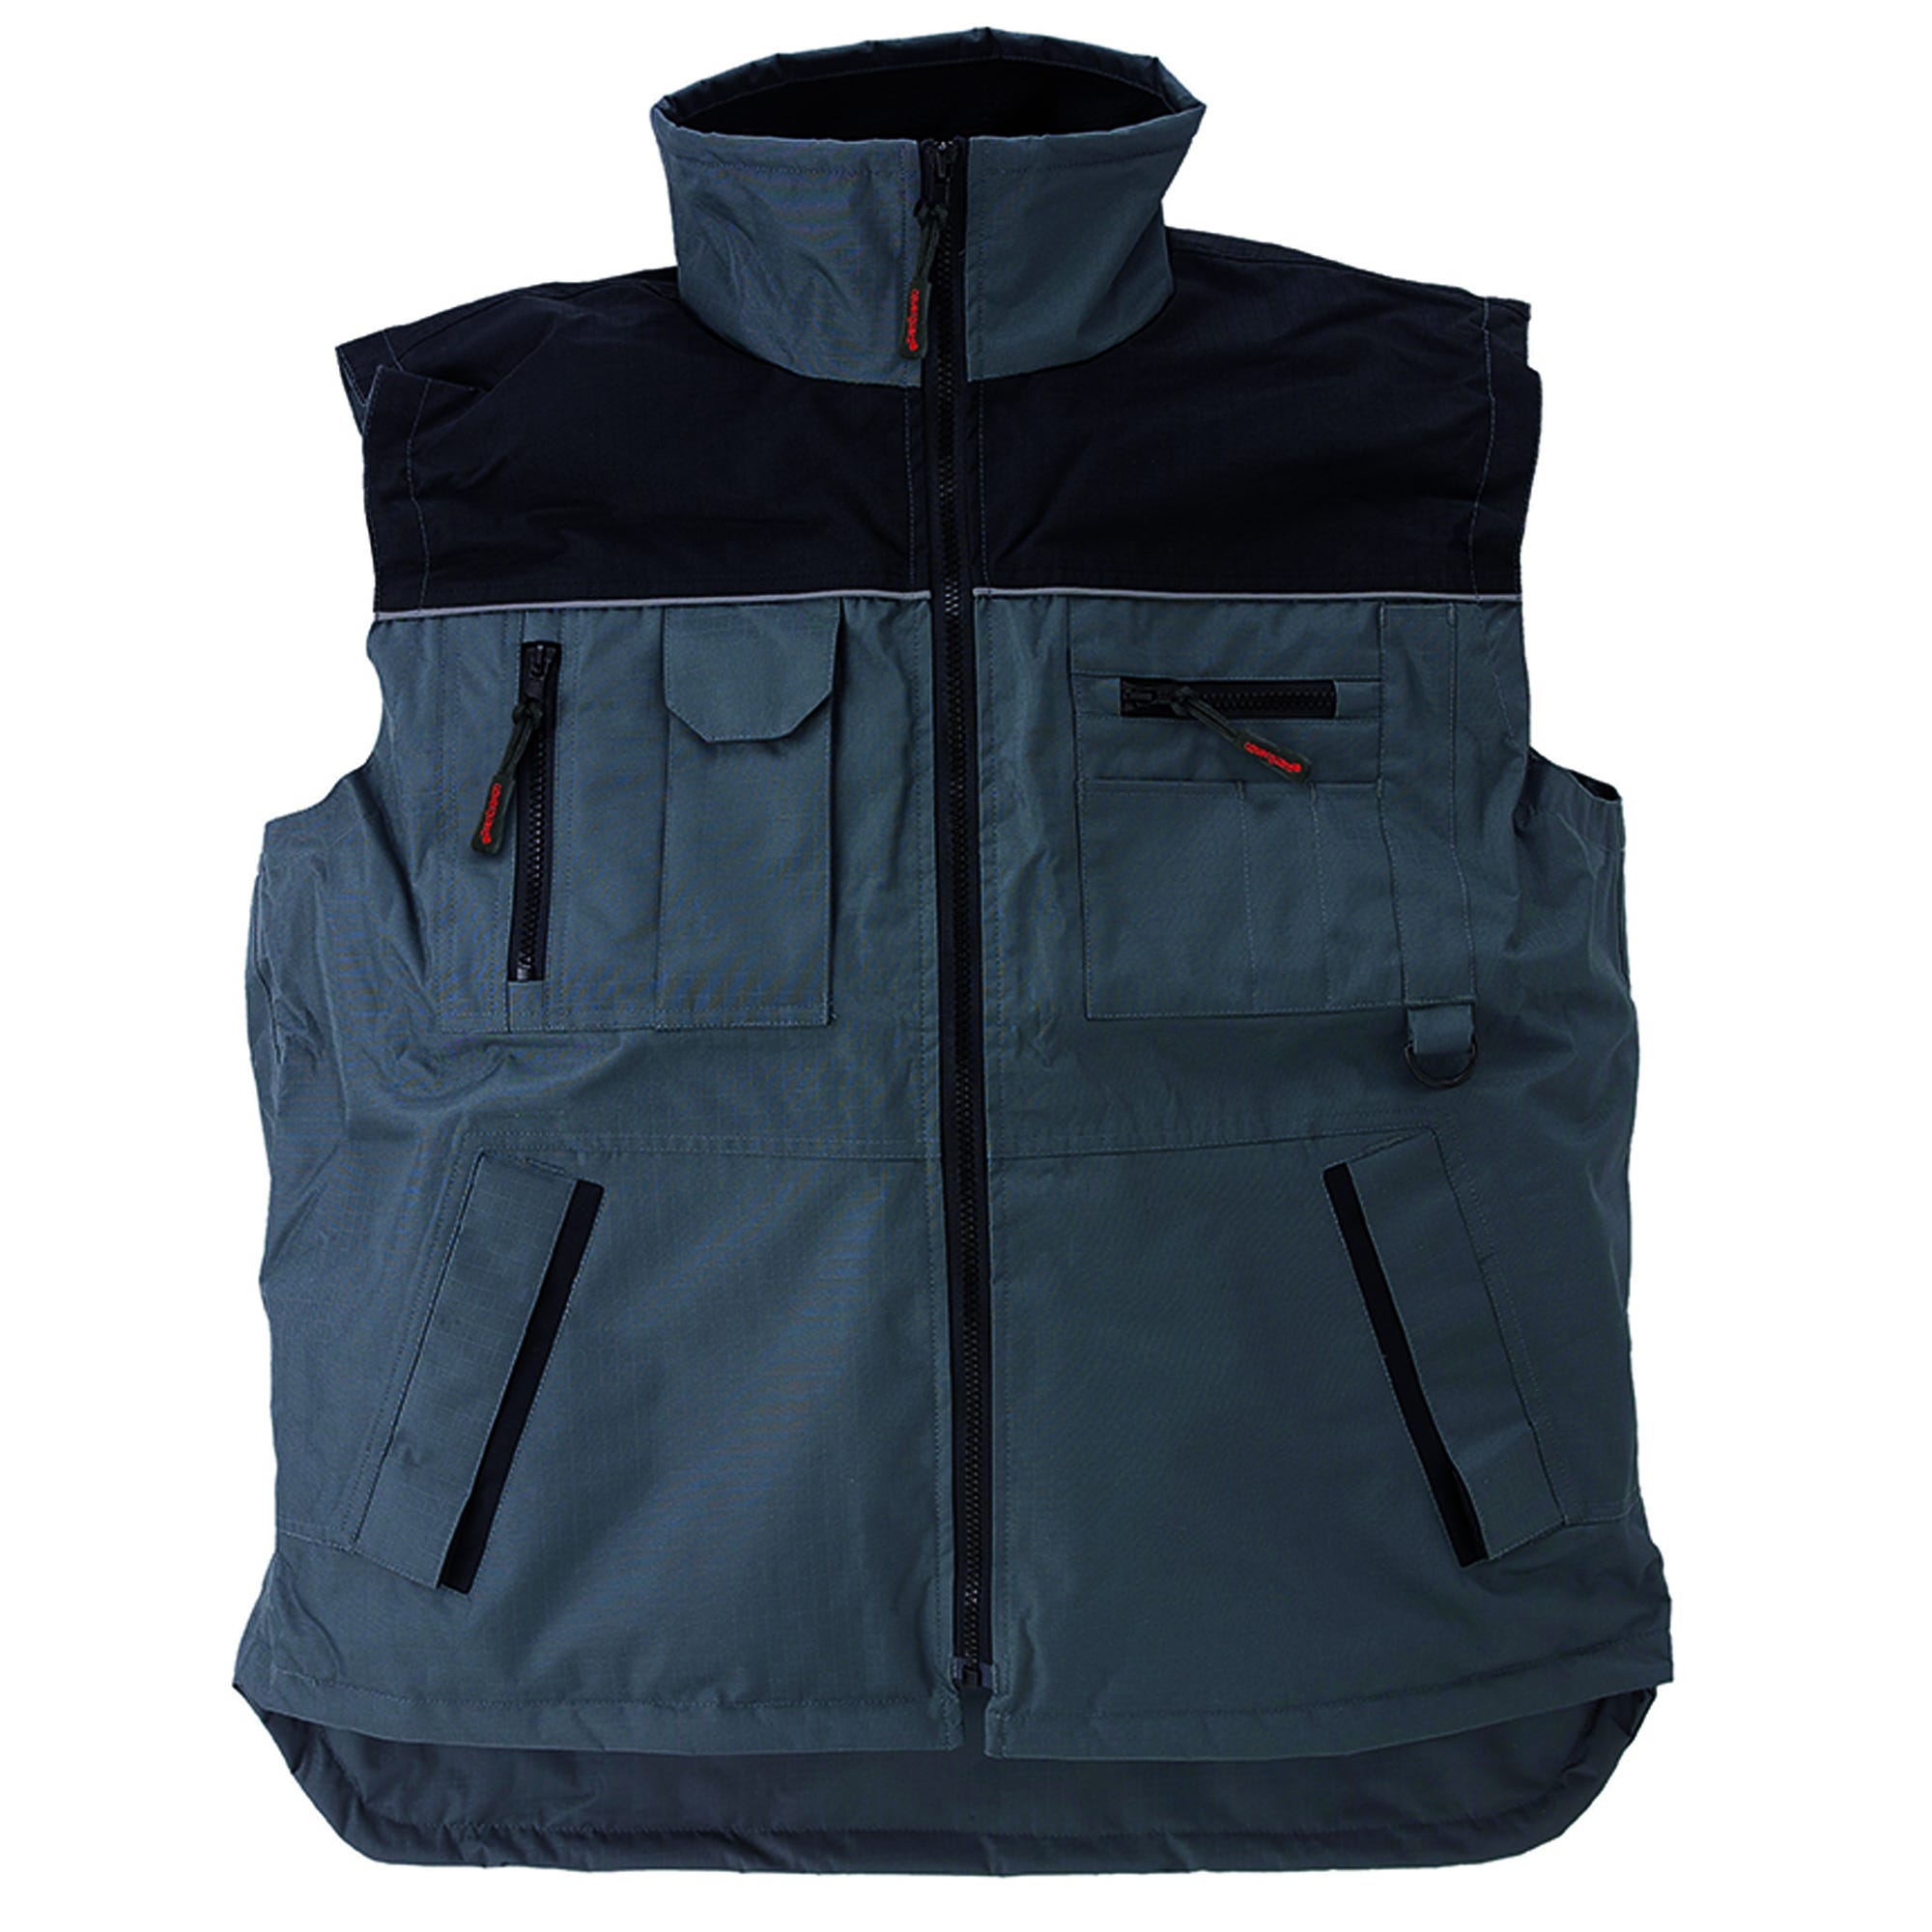 RIPSTOP Gilet Froid gris/noir, Polyester Ripstop + Polaire 280g/m² - COVERGUARD - Taille M 1